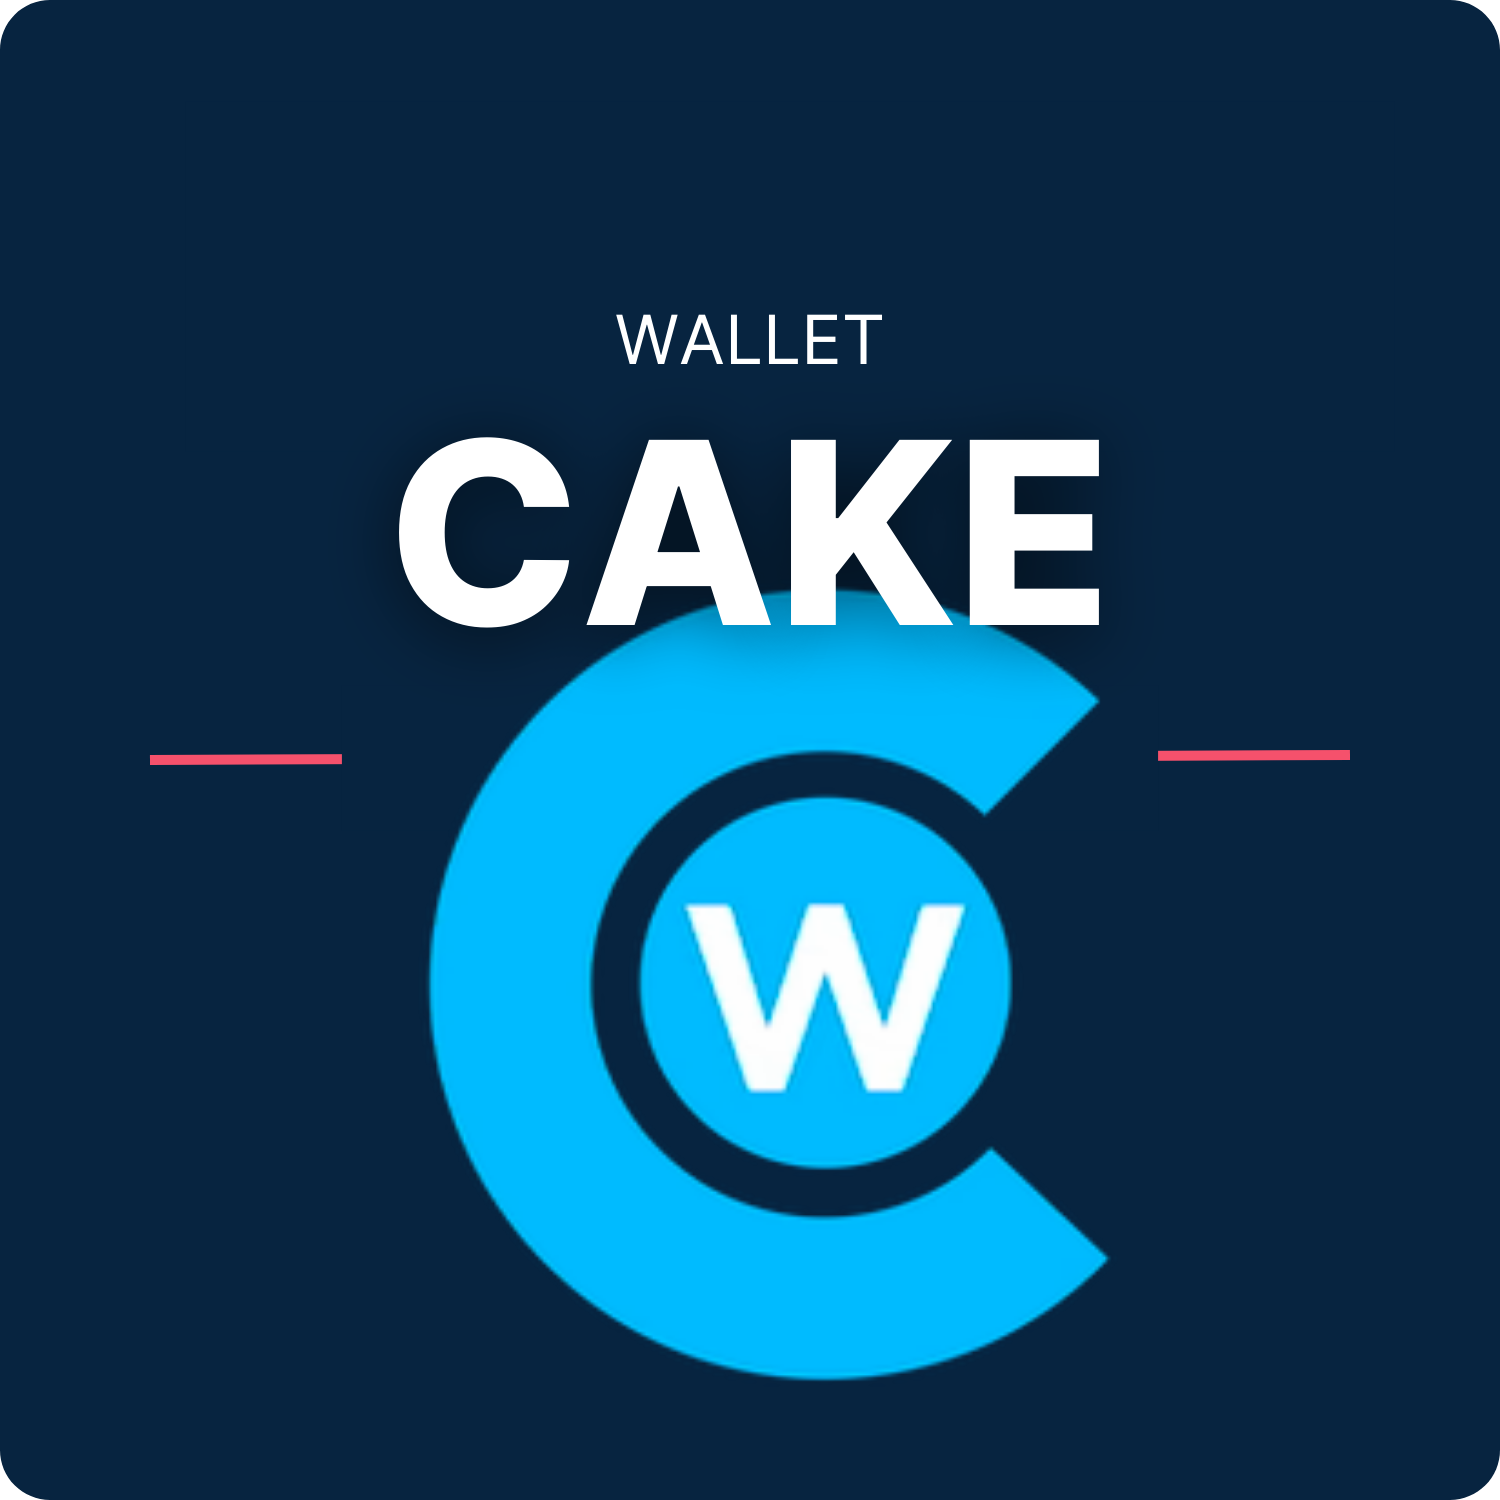 Cake Wallet on X: 